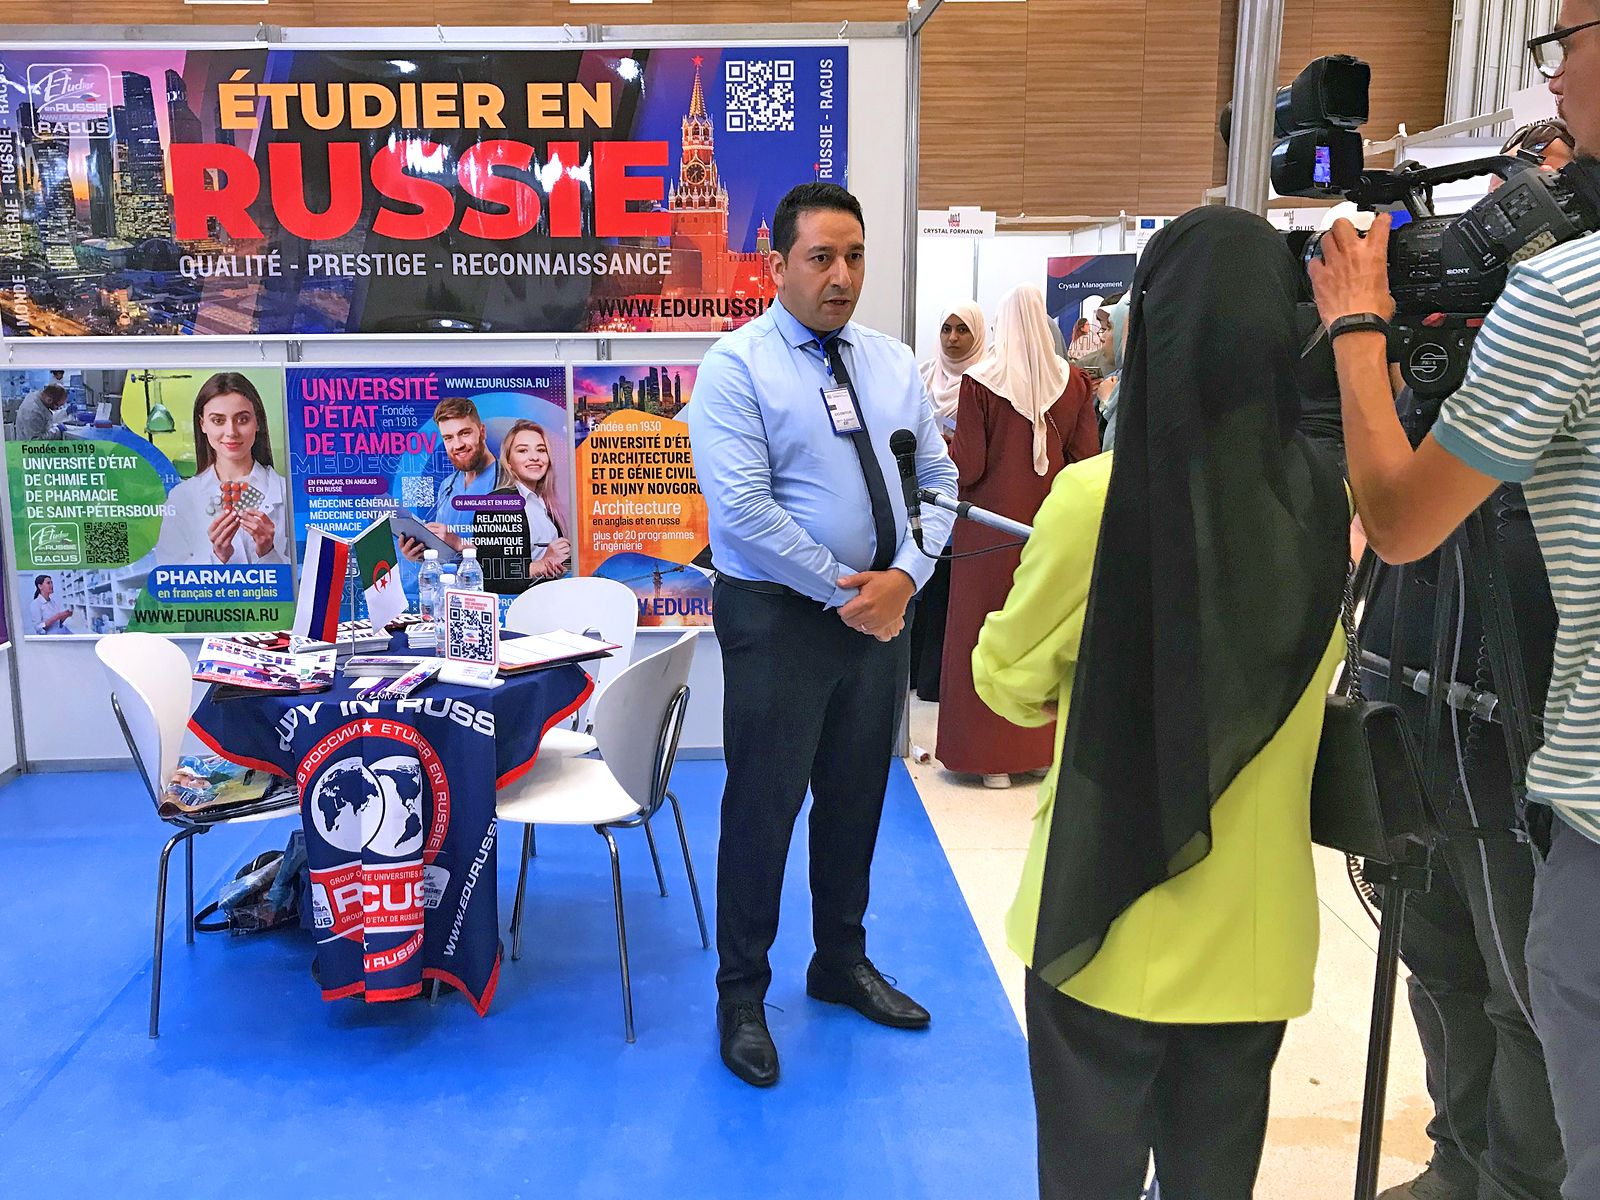 The representative of the organization RACUS in Algeria, Mr. A. Yasin, in an interview at the national Algerian channel Télévision Algérienne, spoke about the mission of the organization RACUS and the advantages of obtaining a diploma of higher education in Russia. Among the undoubted advantages is a wide choice of programmes (more than 1,200), the possibility of studying in French, Russian and English, the high status and recognition of the Russian diploma in any country of the world, as well as affordable tuition fees. According to the UN statistics, Russia ranks first in the world in terms of literacy and the number of people with higher education among the adult population.